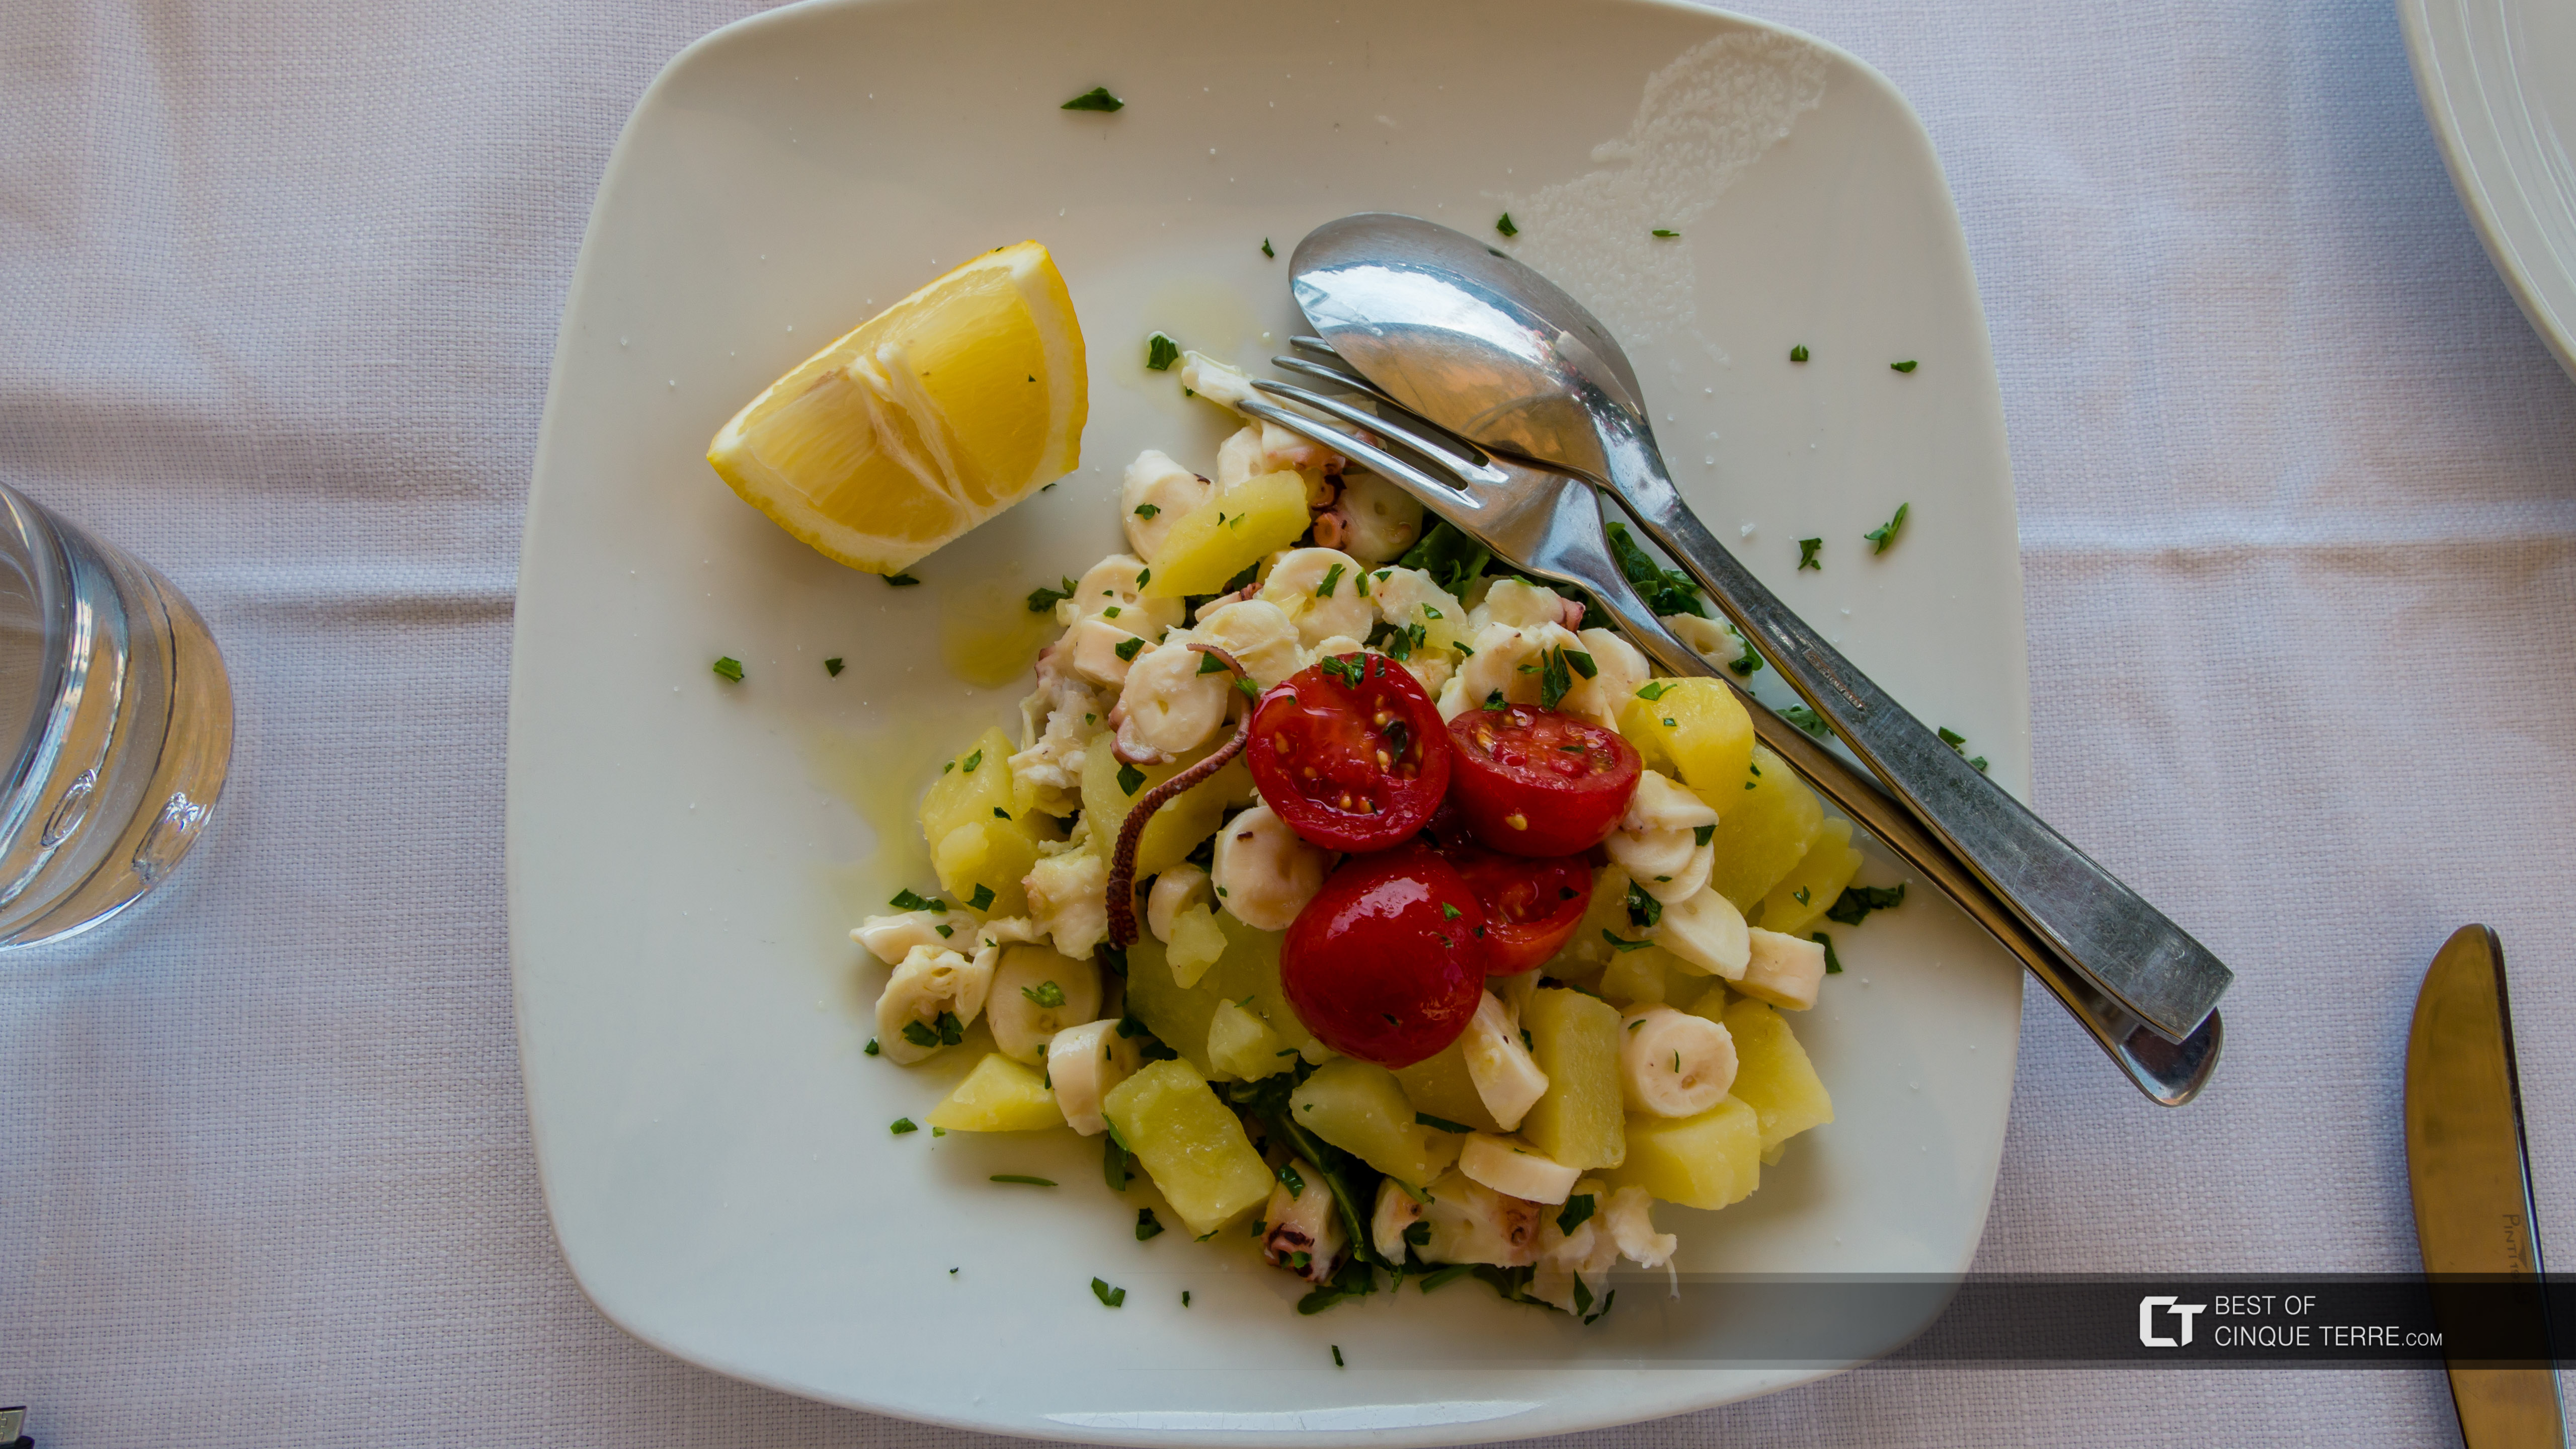 Octopus and Potatoes Salad Ligurian Style, Local food, Cinque Terre, Italy